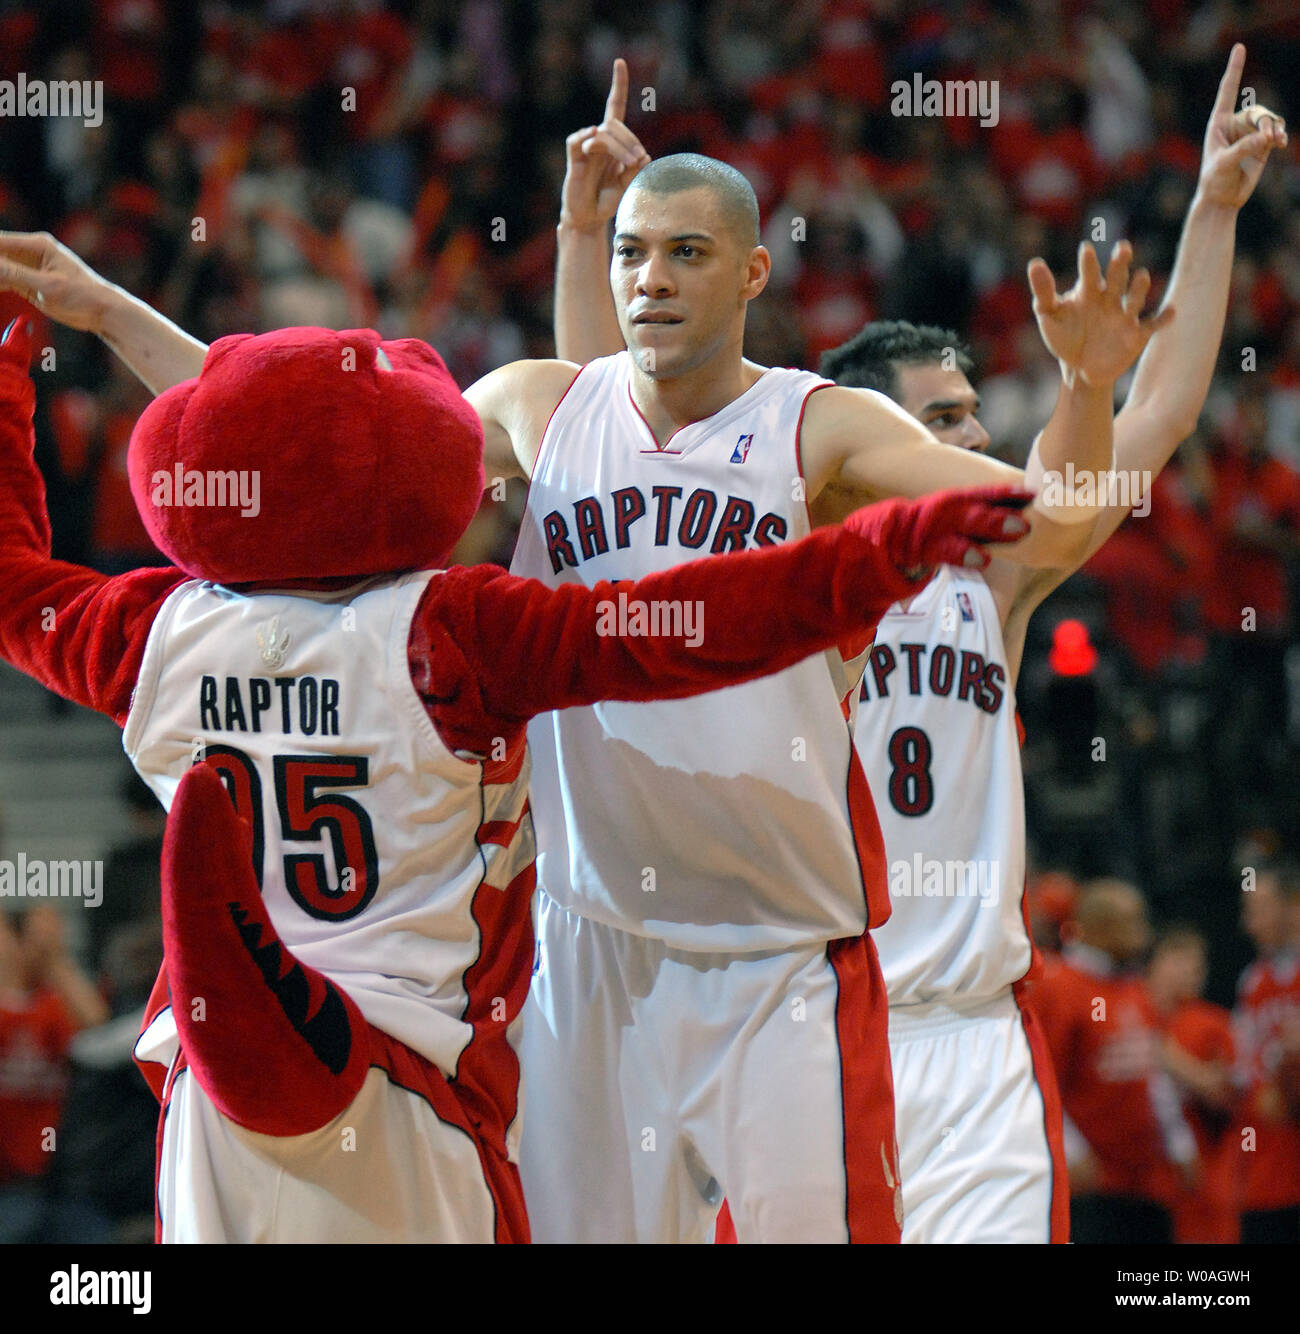 Toronto Raptors' Anthony Parker (R) celebrates with the team mascot after  Toronto defeated the Orlando Magic 108-94 in Game 3 of their playoff series  at the Air Canada Center in Toronto, Canada